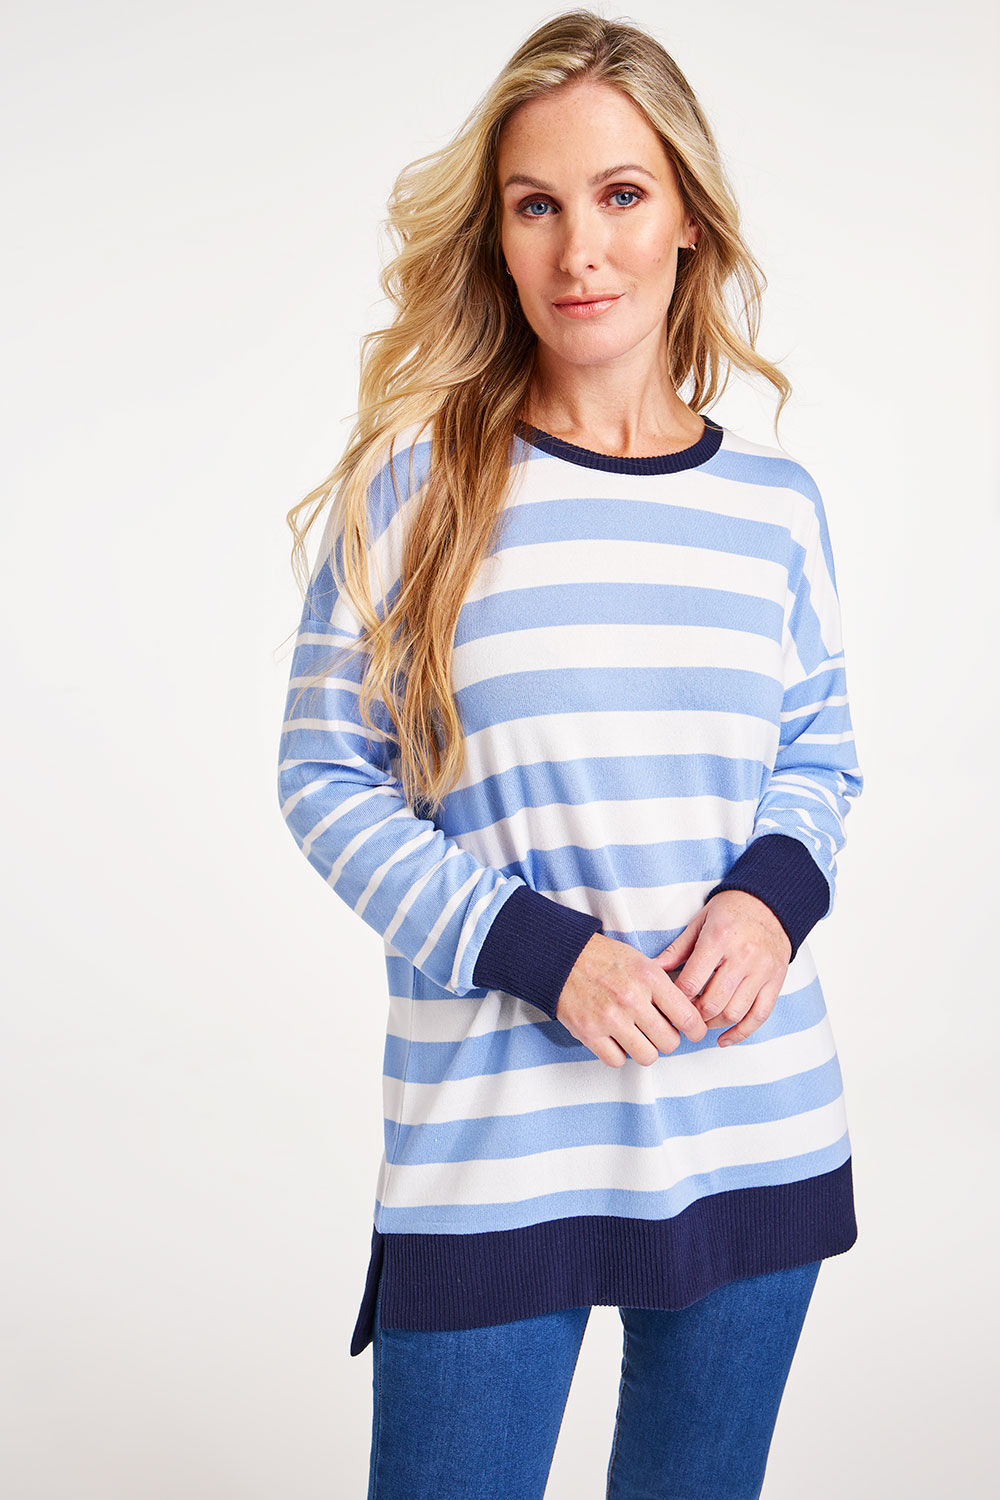 Bonmarche Women’s Lorraine Loves Collection Blue Striped Long Sleeve Soft Touch Tunic, Size: 14